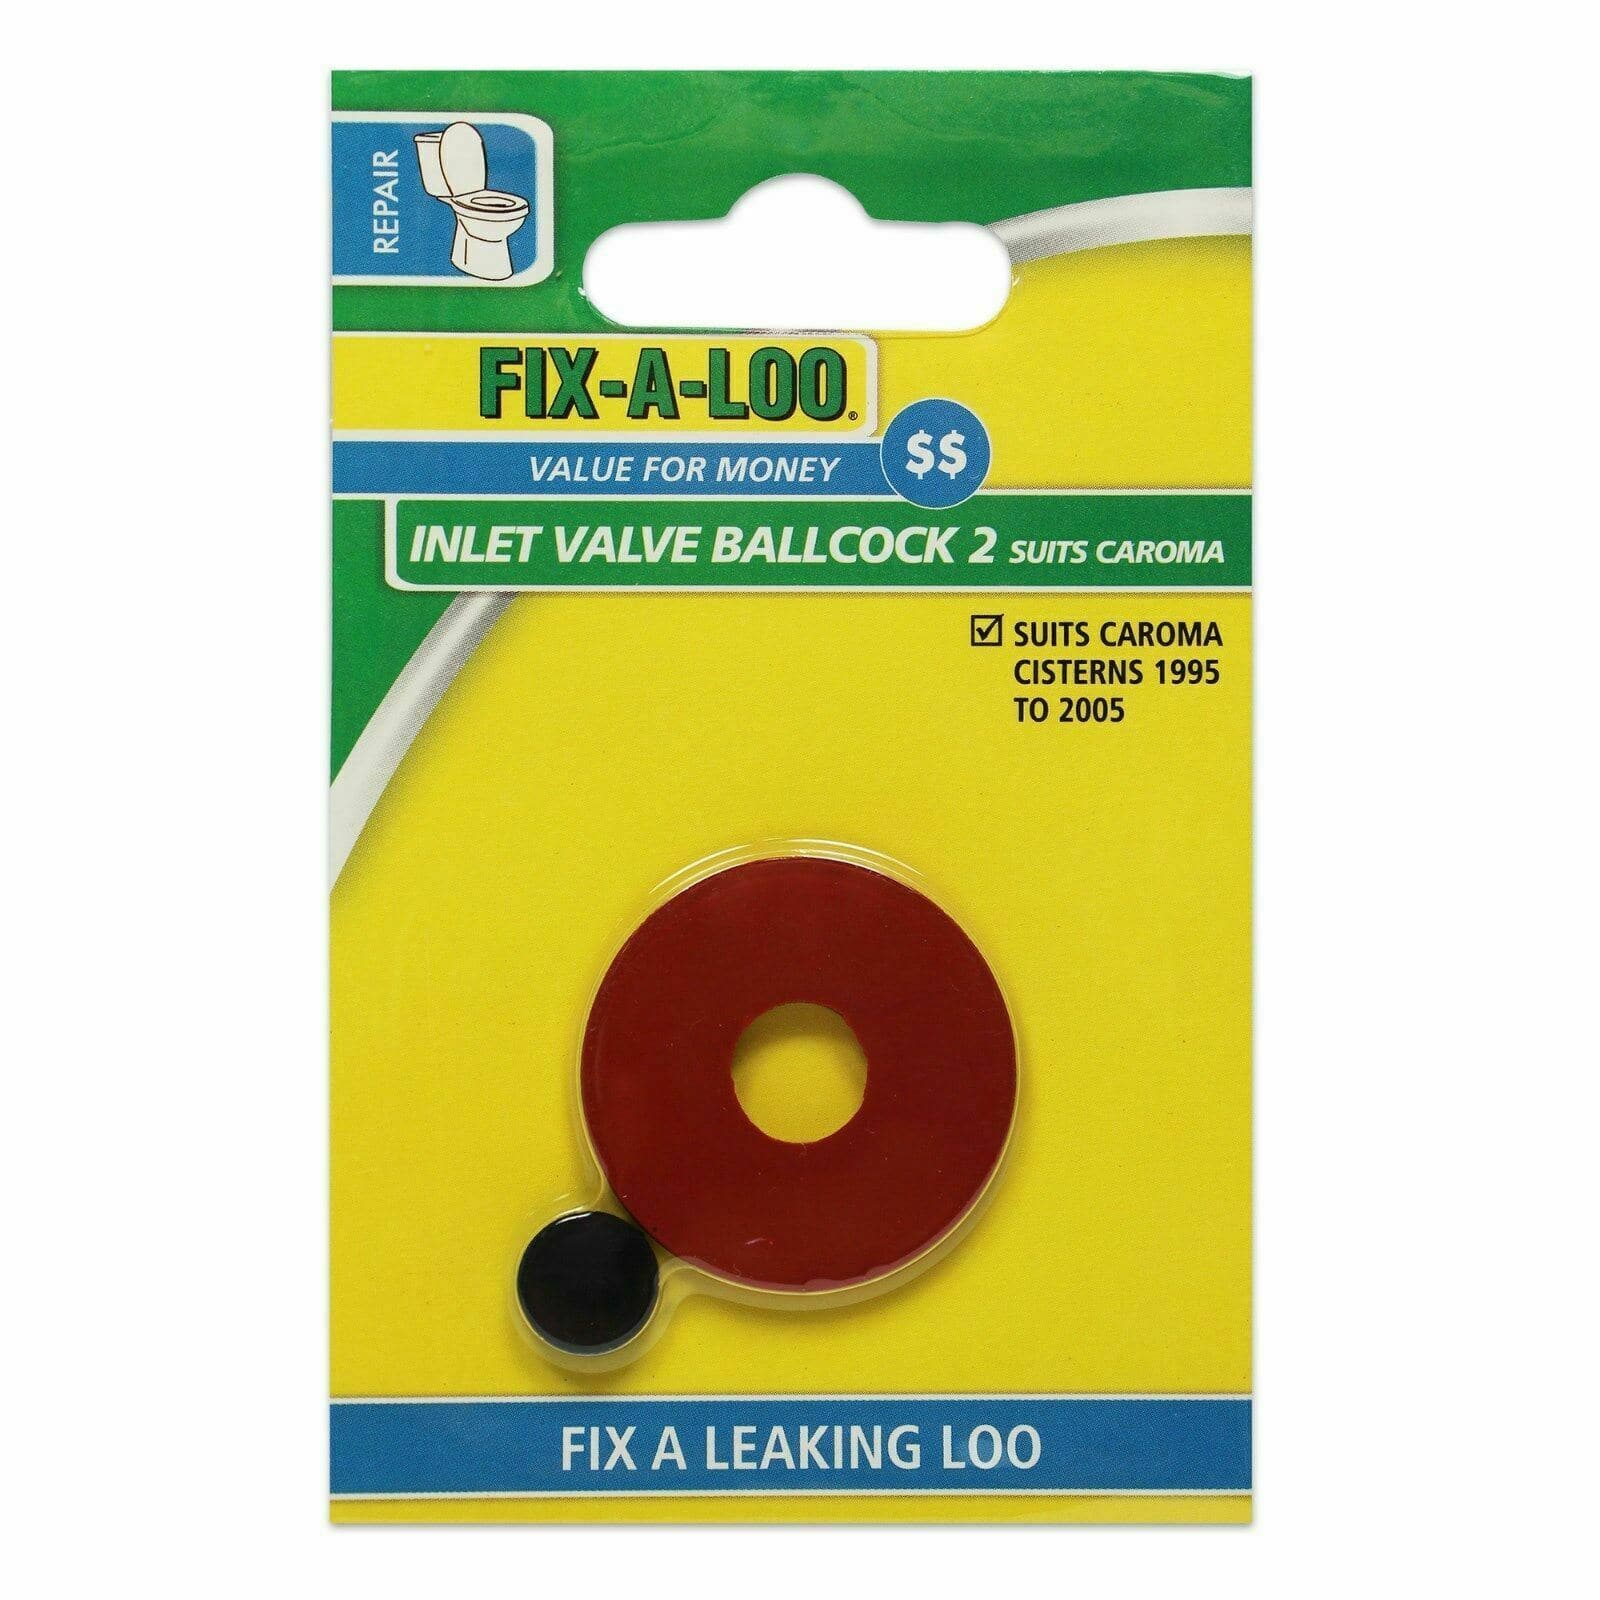 FIX-A-LOO Inlet Valve Ballcock 2 Suits Caroma 226150 - Double Bay Hardware